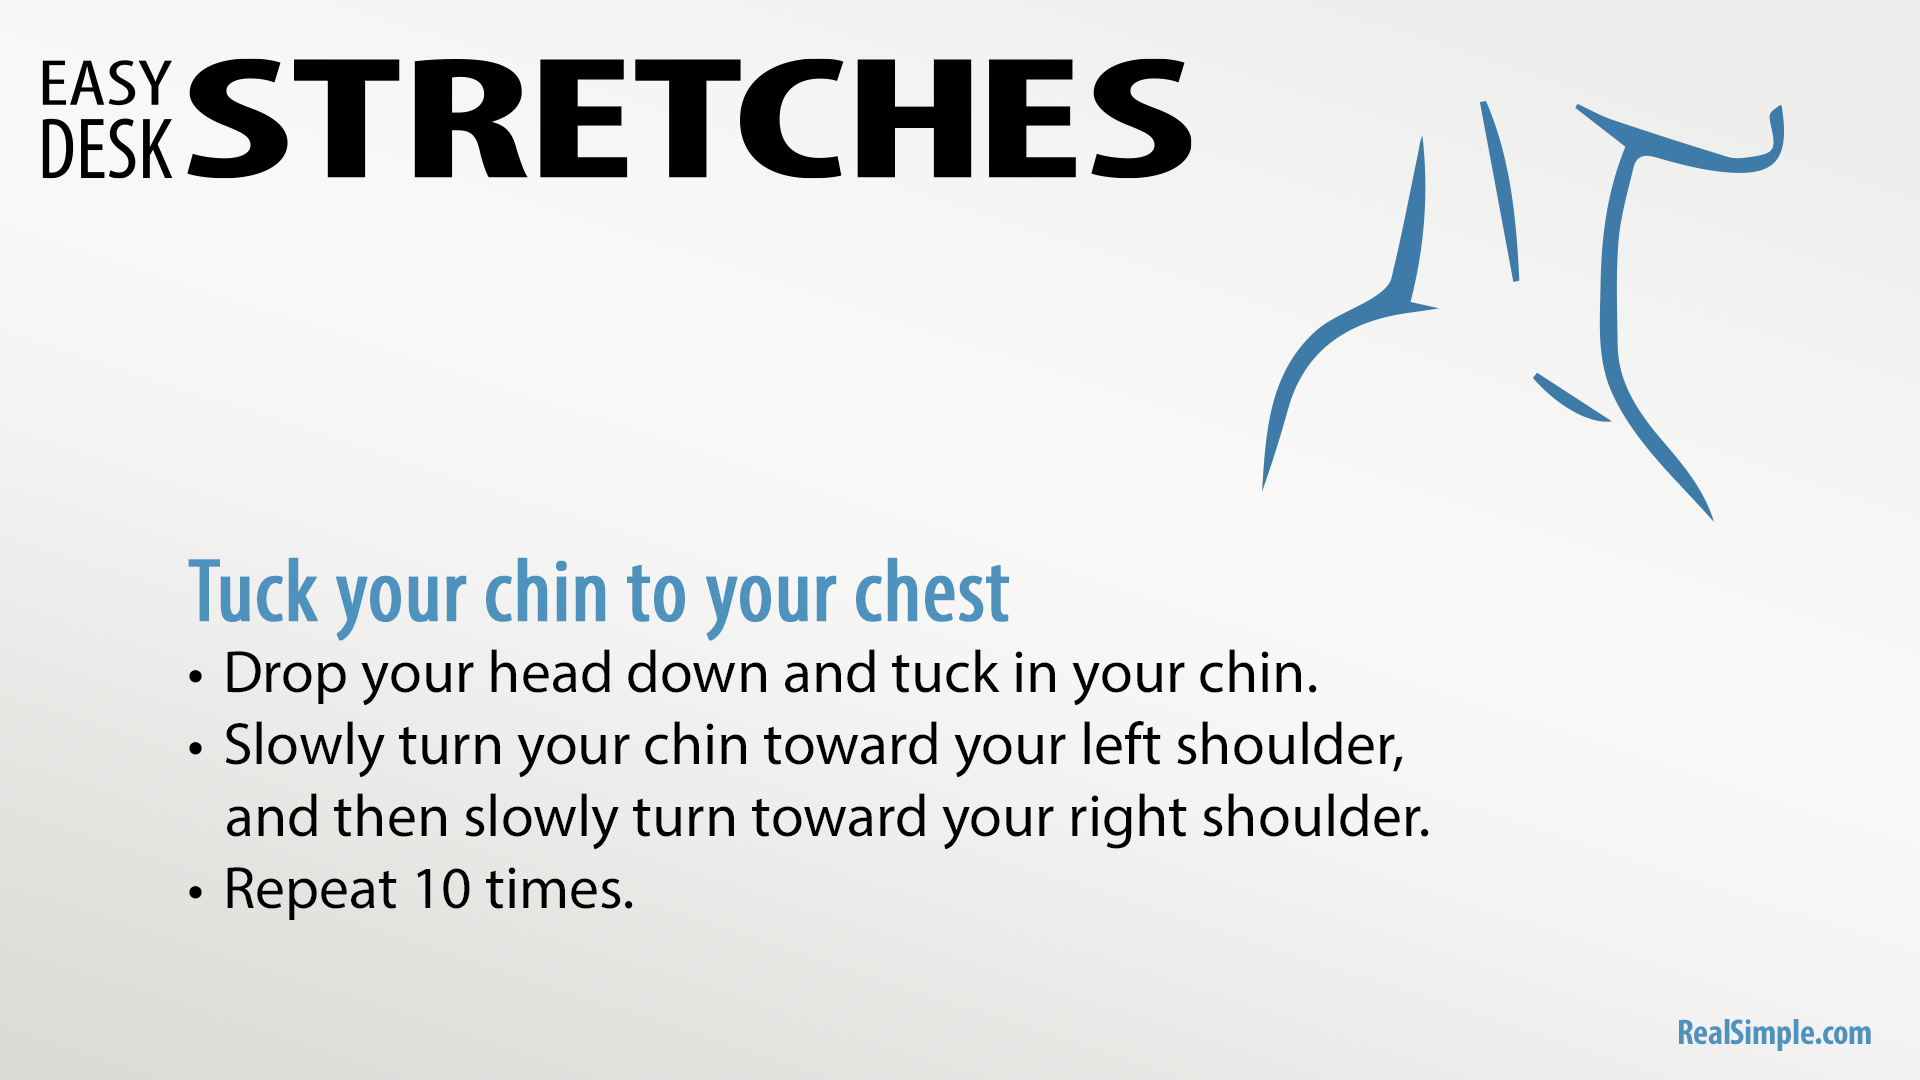 Free Graphic | Easy Desk Stretches | Tuck Your Chin